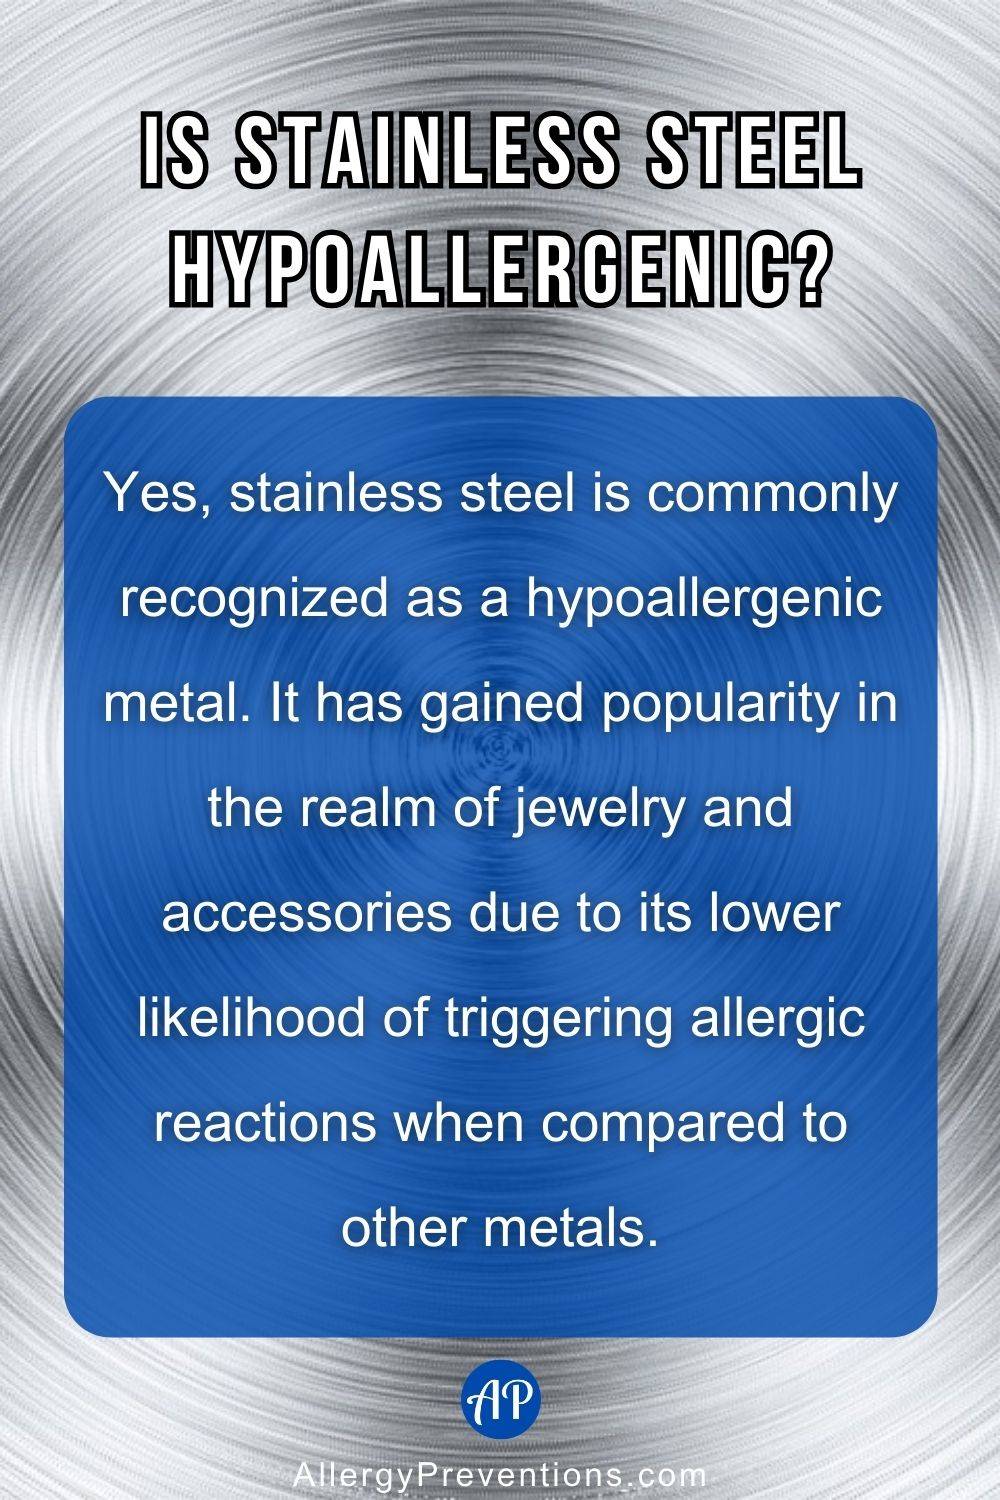 Is stainless steel hypoallergenic infographic. Is stainless steel hypoallergenic? Yes, stainless steel is commonly recognized as a hypoallergenic metal. It has gained popularity in the realm of jewelry and accessories due to its lower likelihood of triggering allergic reactions when compared to other metals.